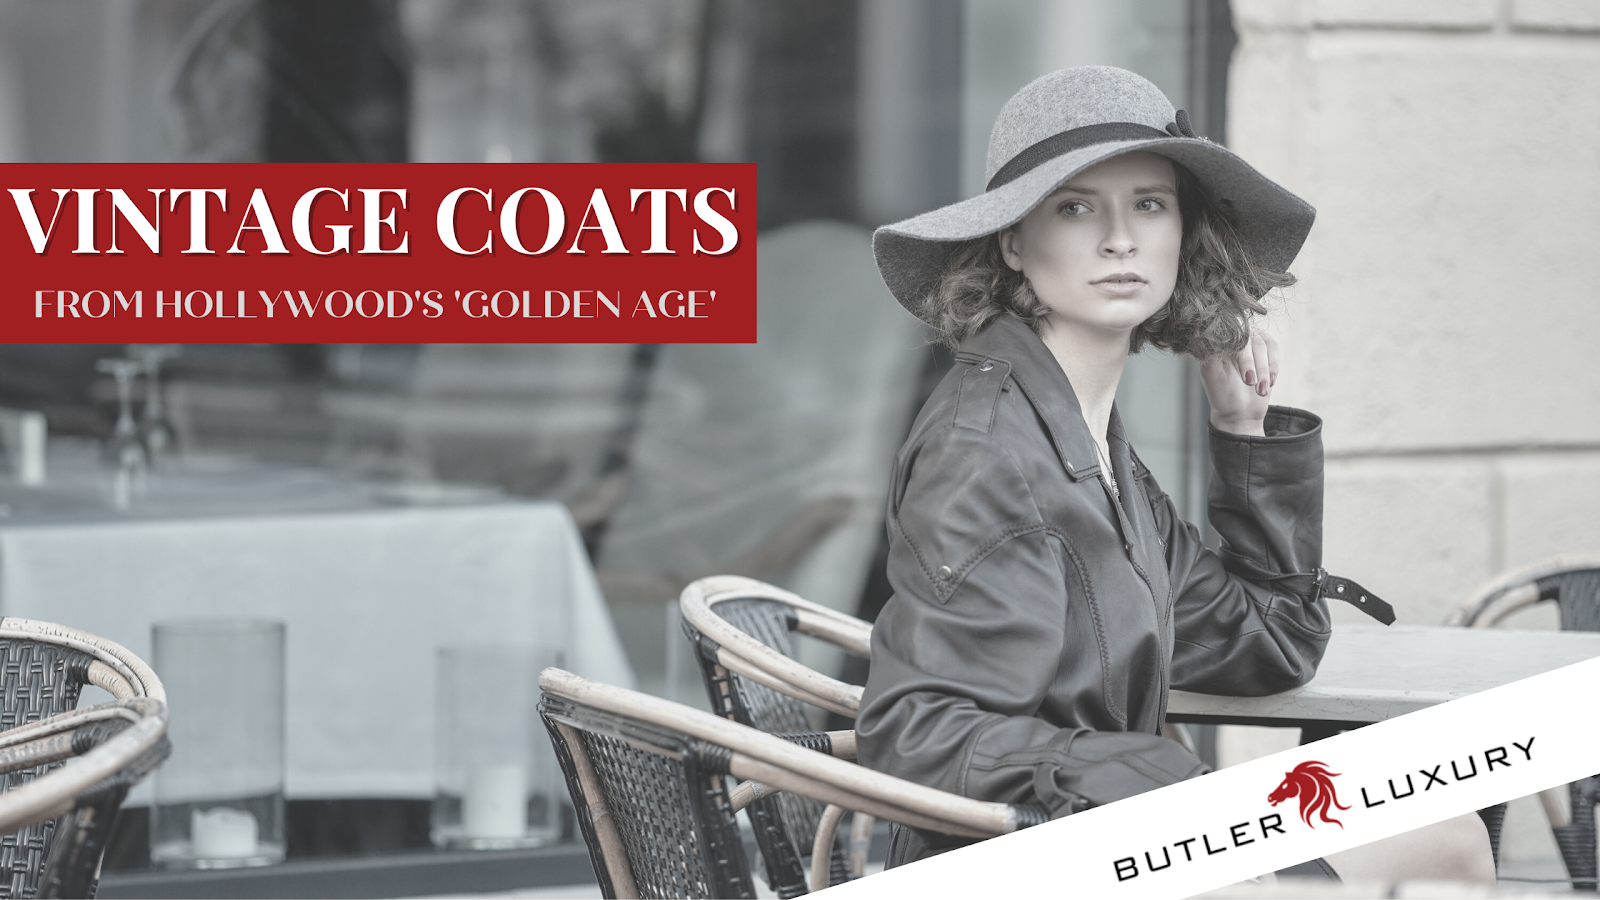 Recreate Hollywood’s ‘Golden Age’ With These Women’s Vintage Coats